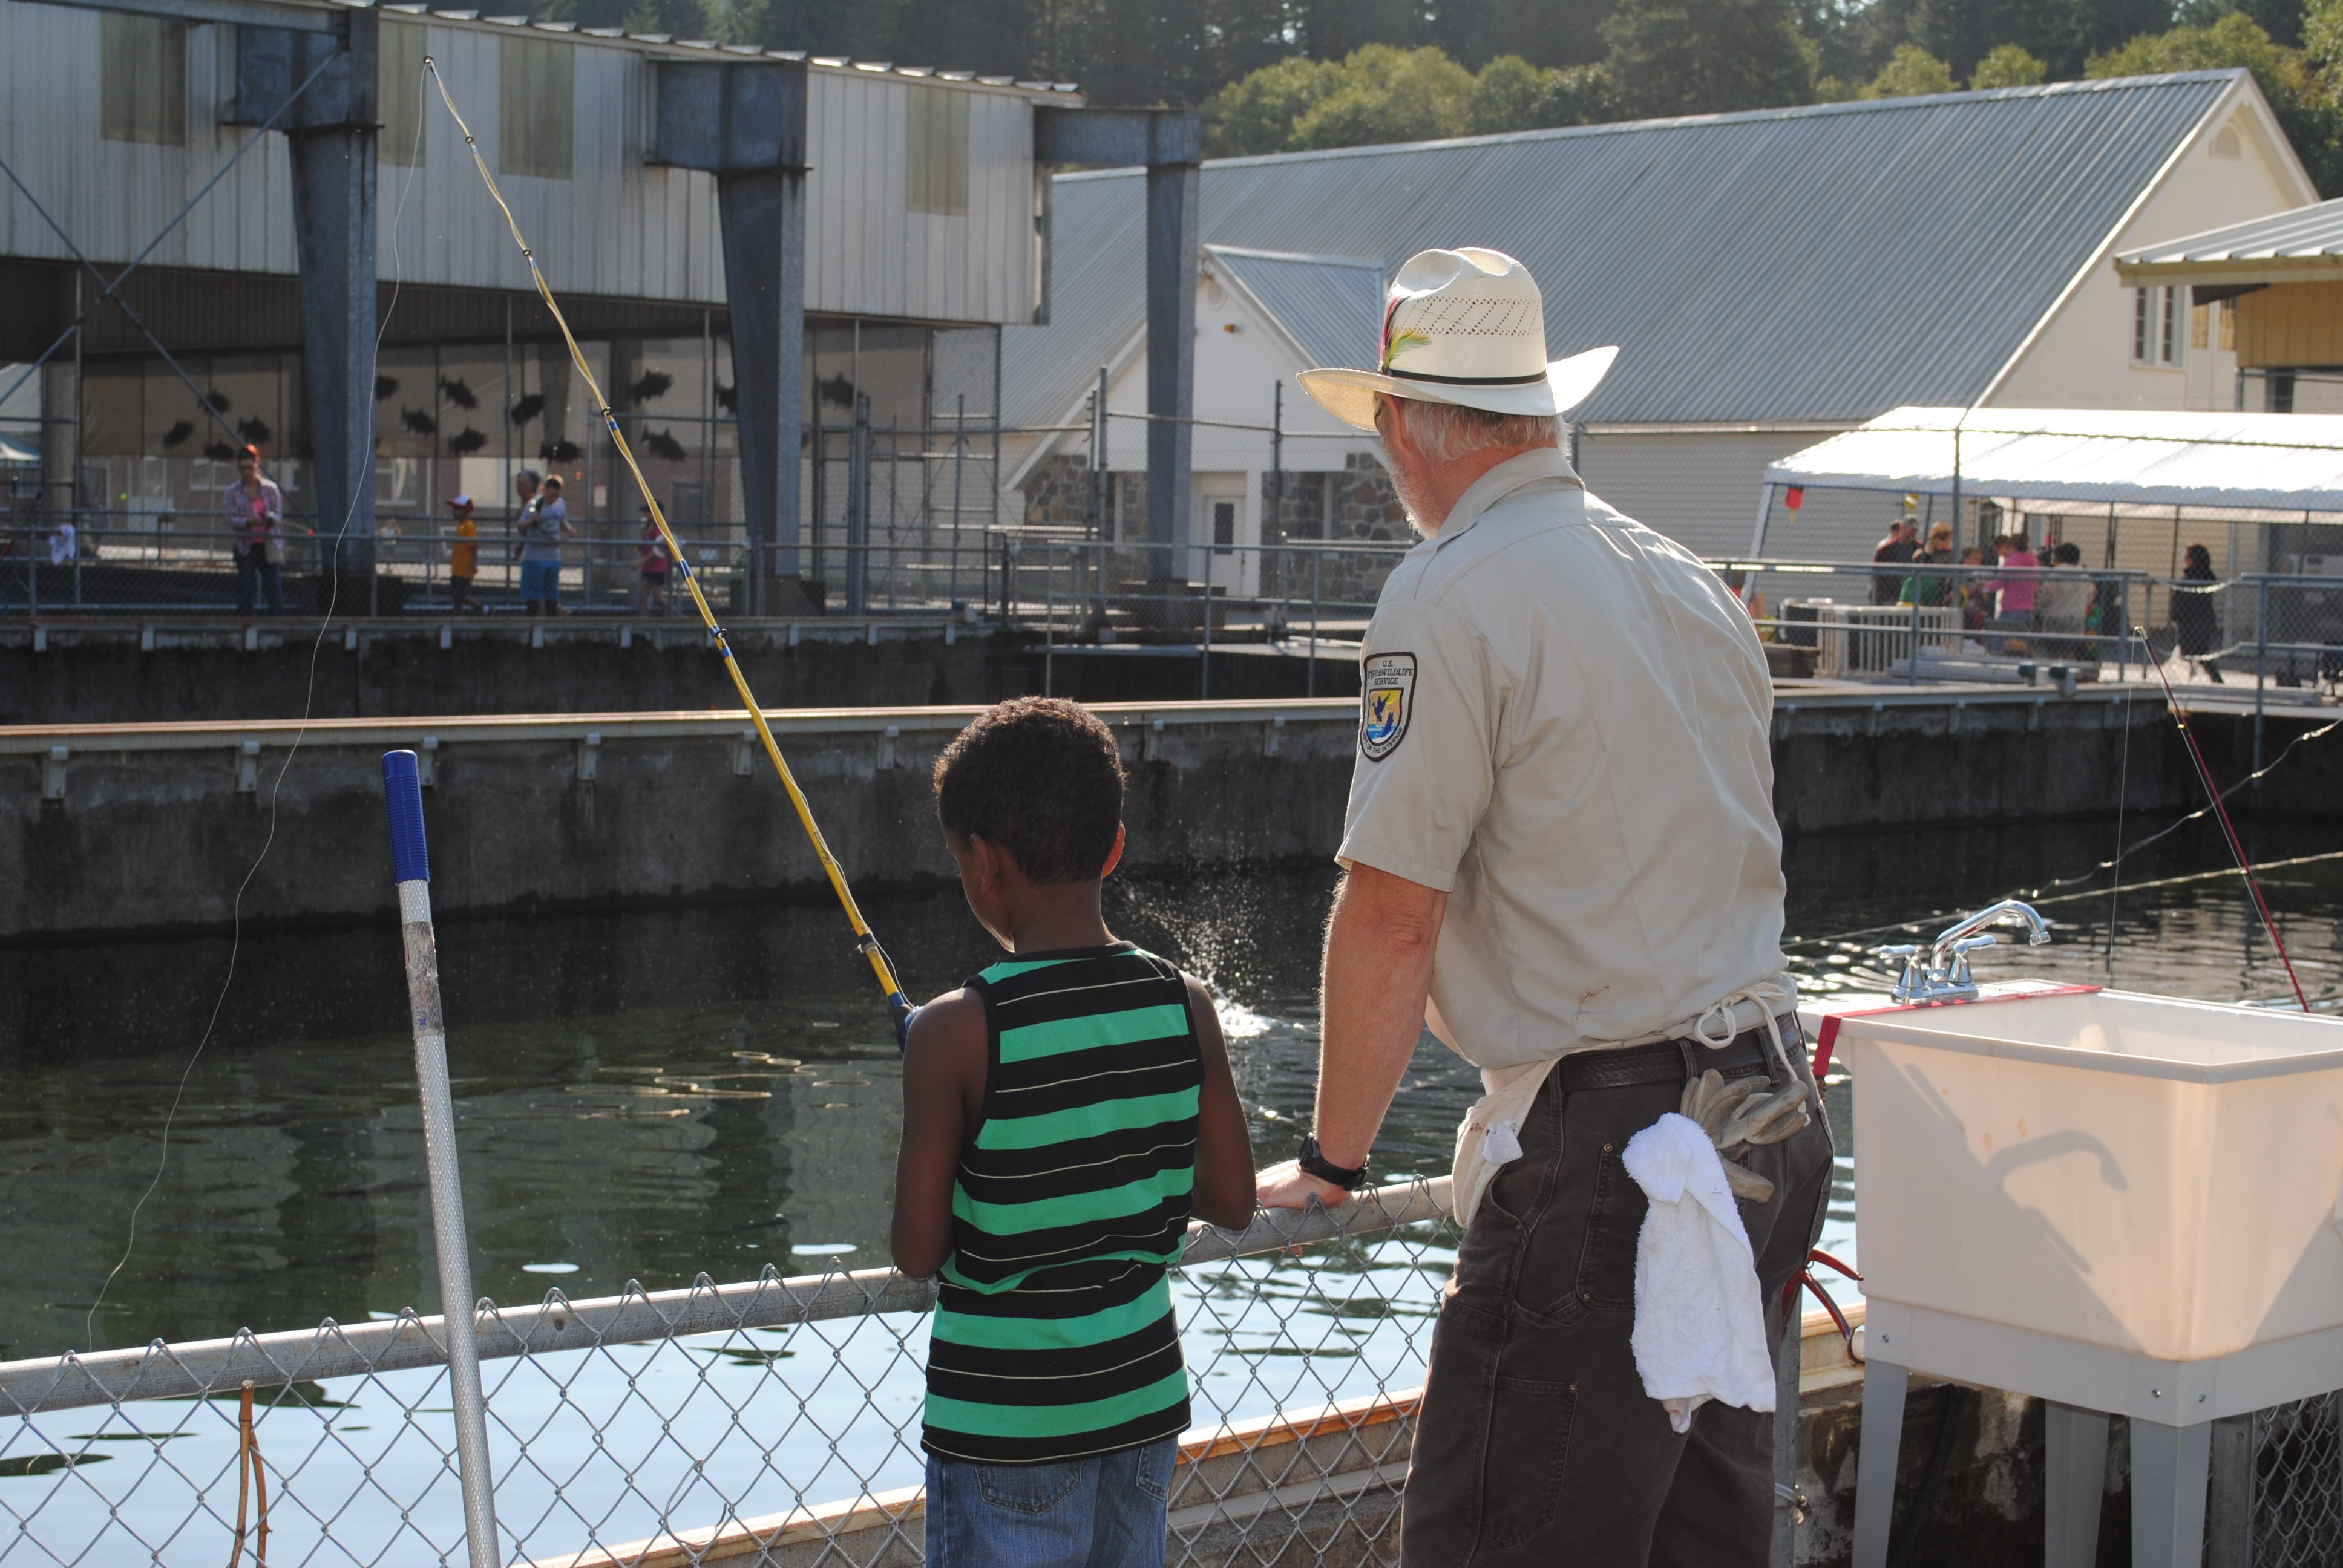 An adult showing a young person to fish over a railing at a fish hatchery.